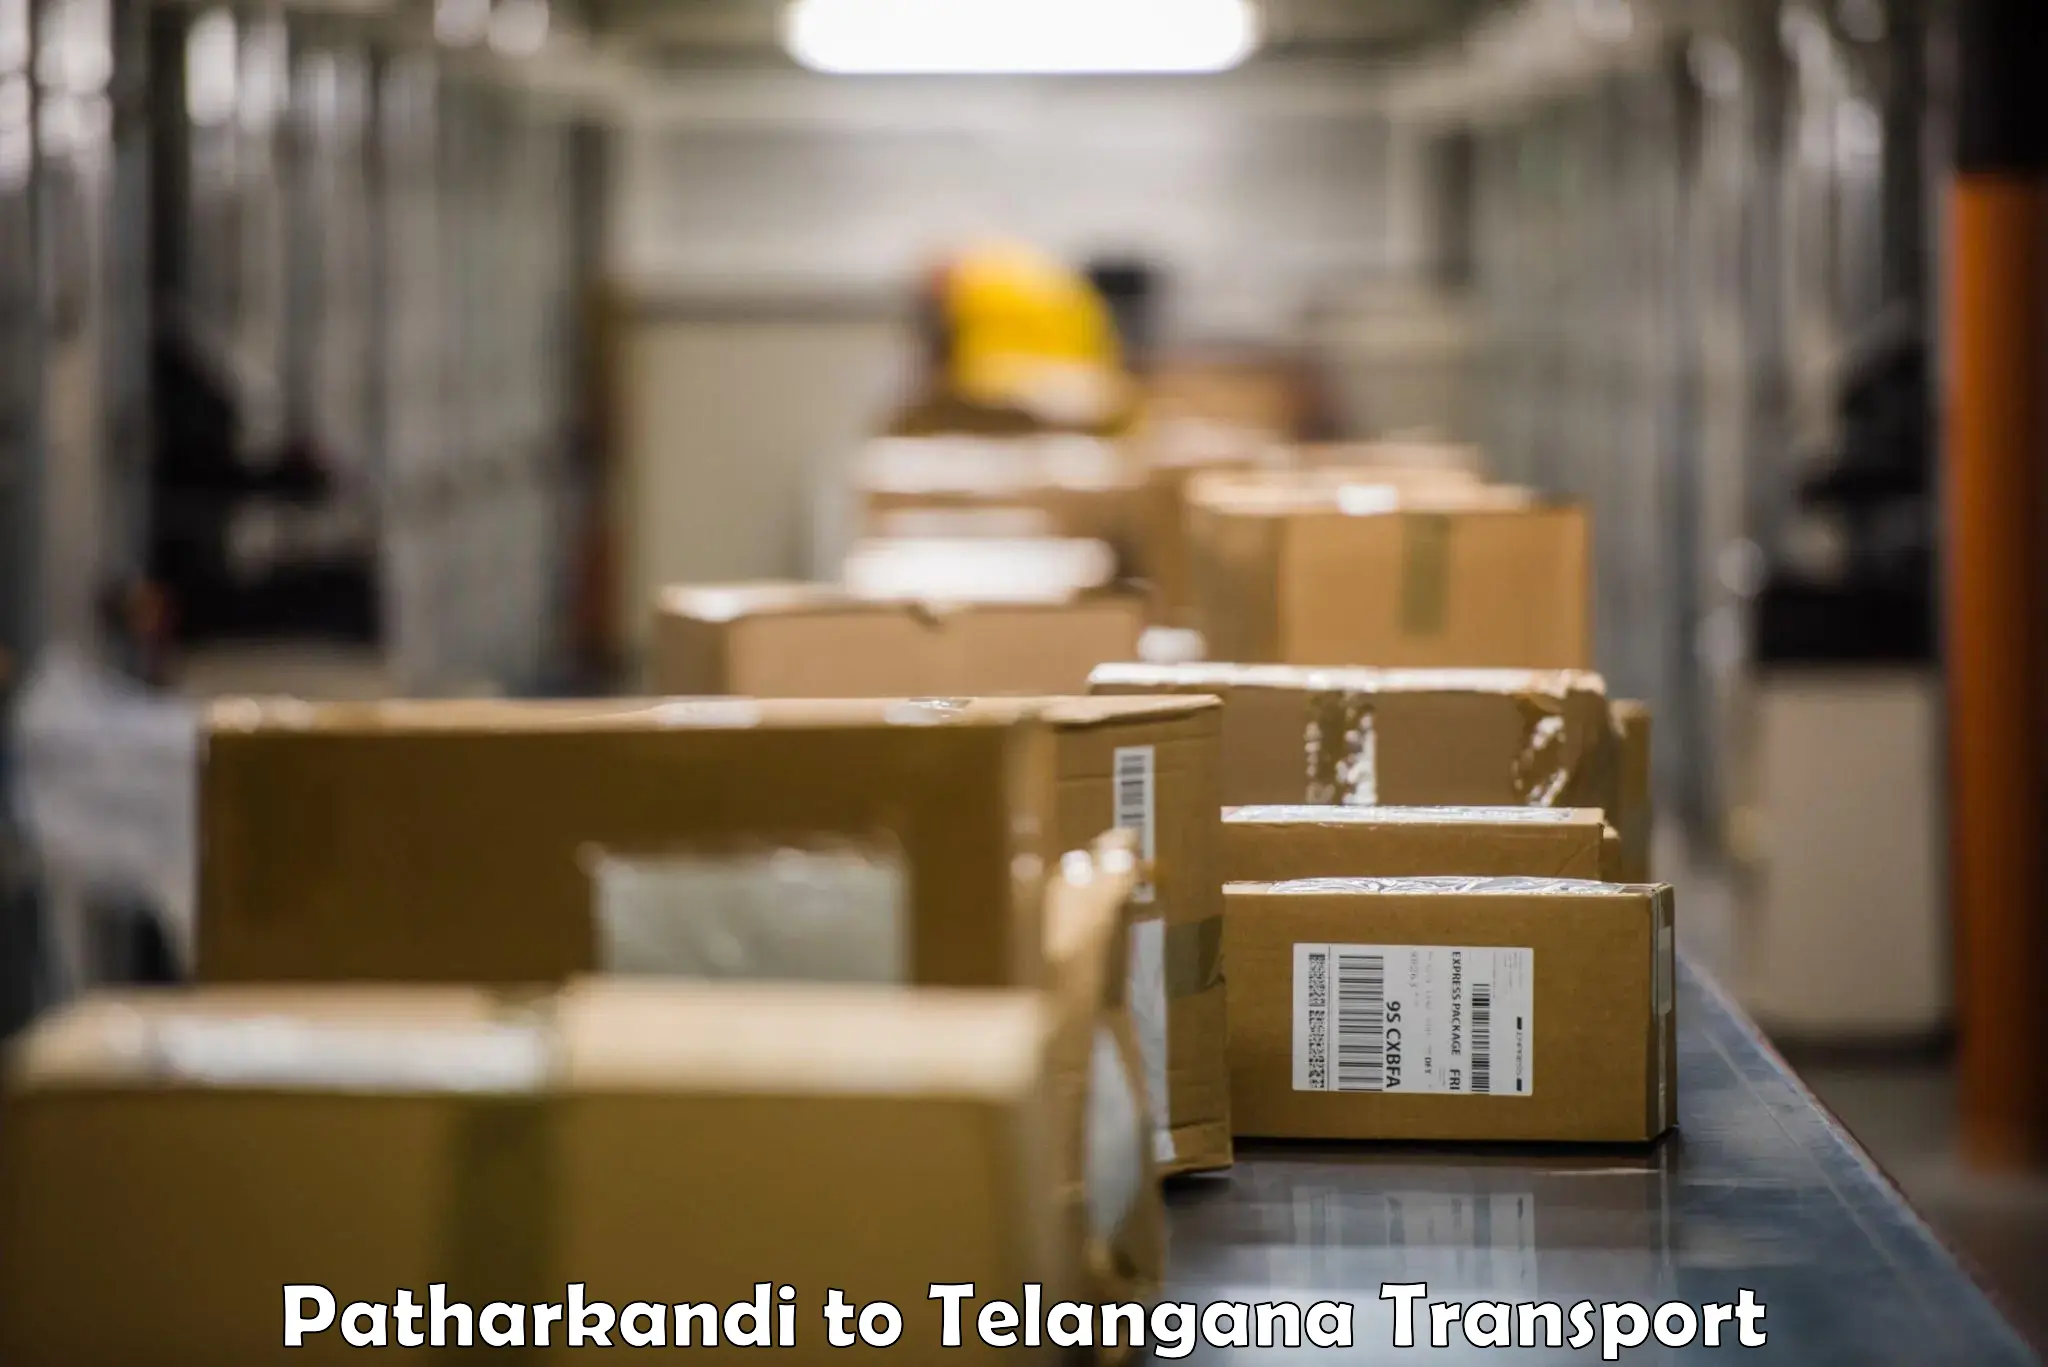 Daily parcel service transport Patharkandi to Mancherial